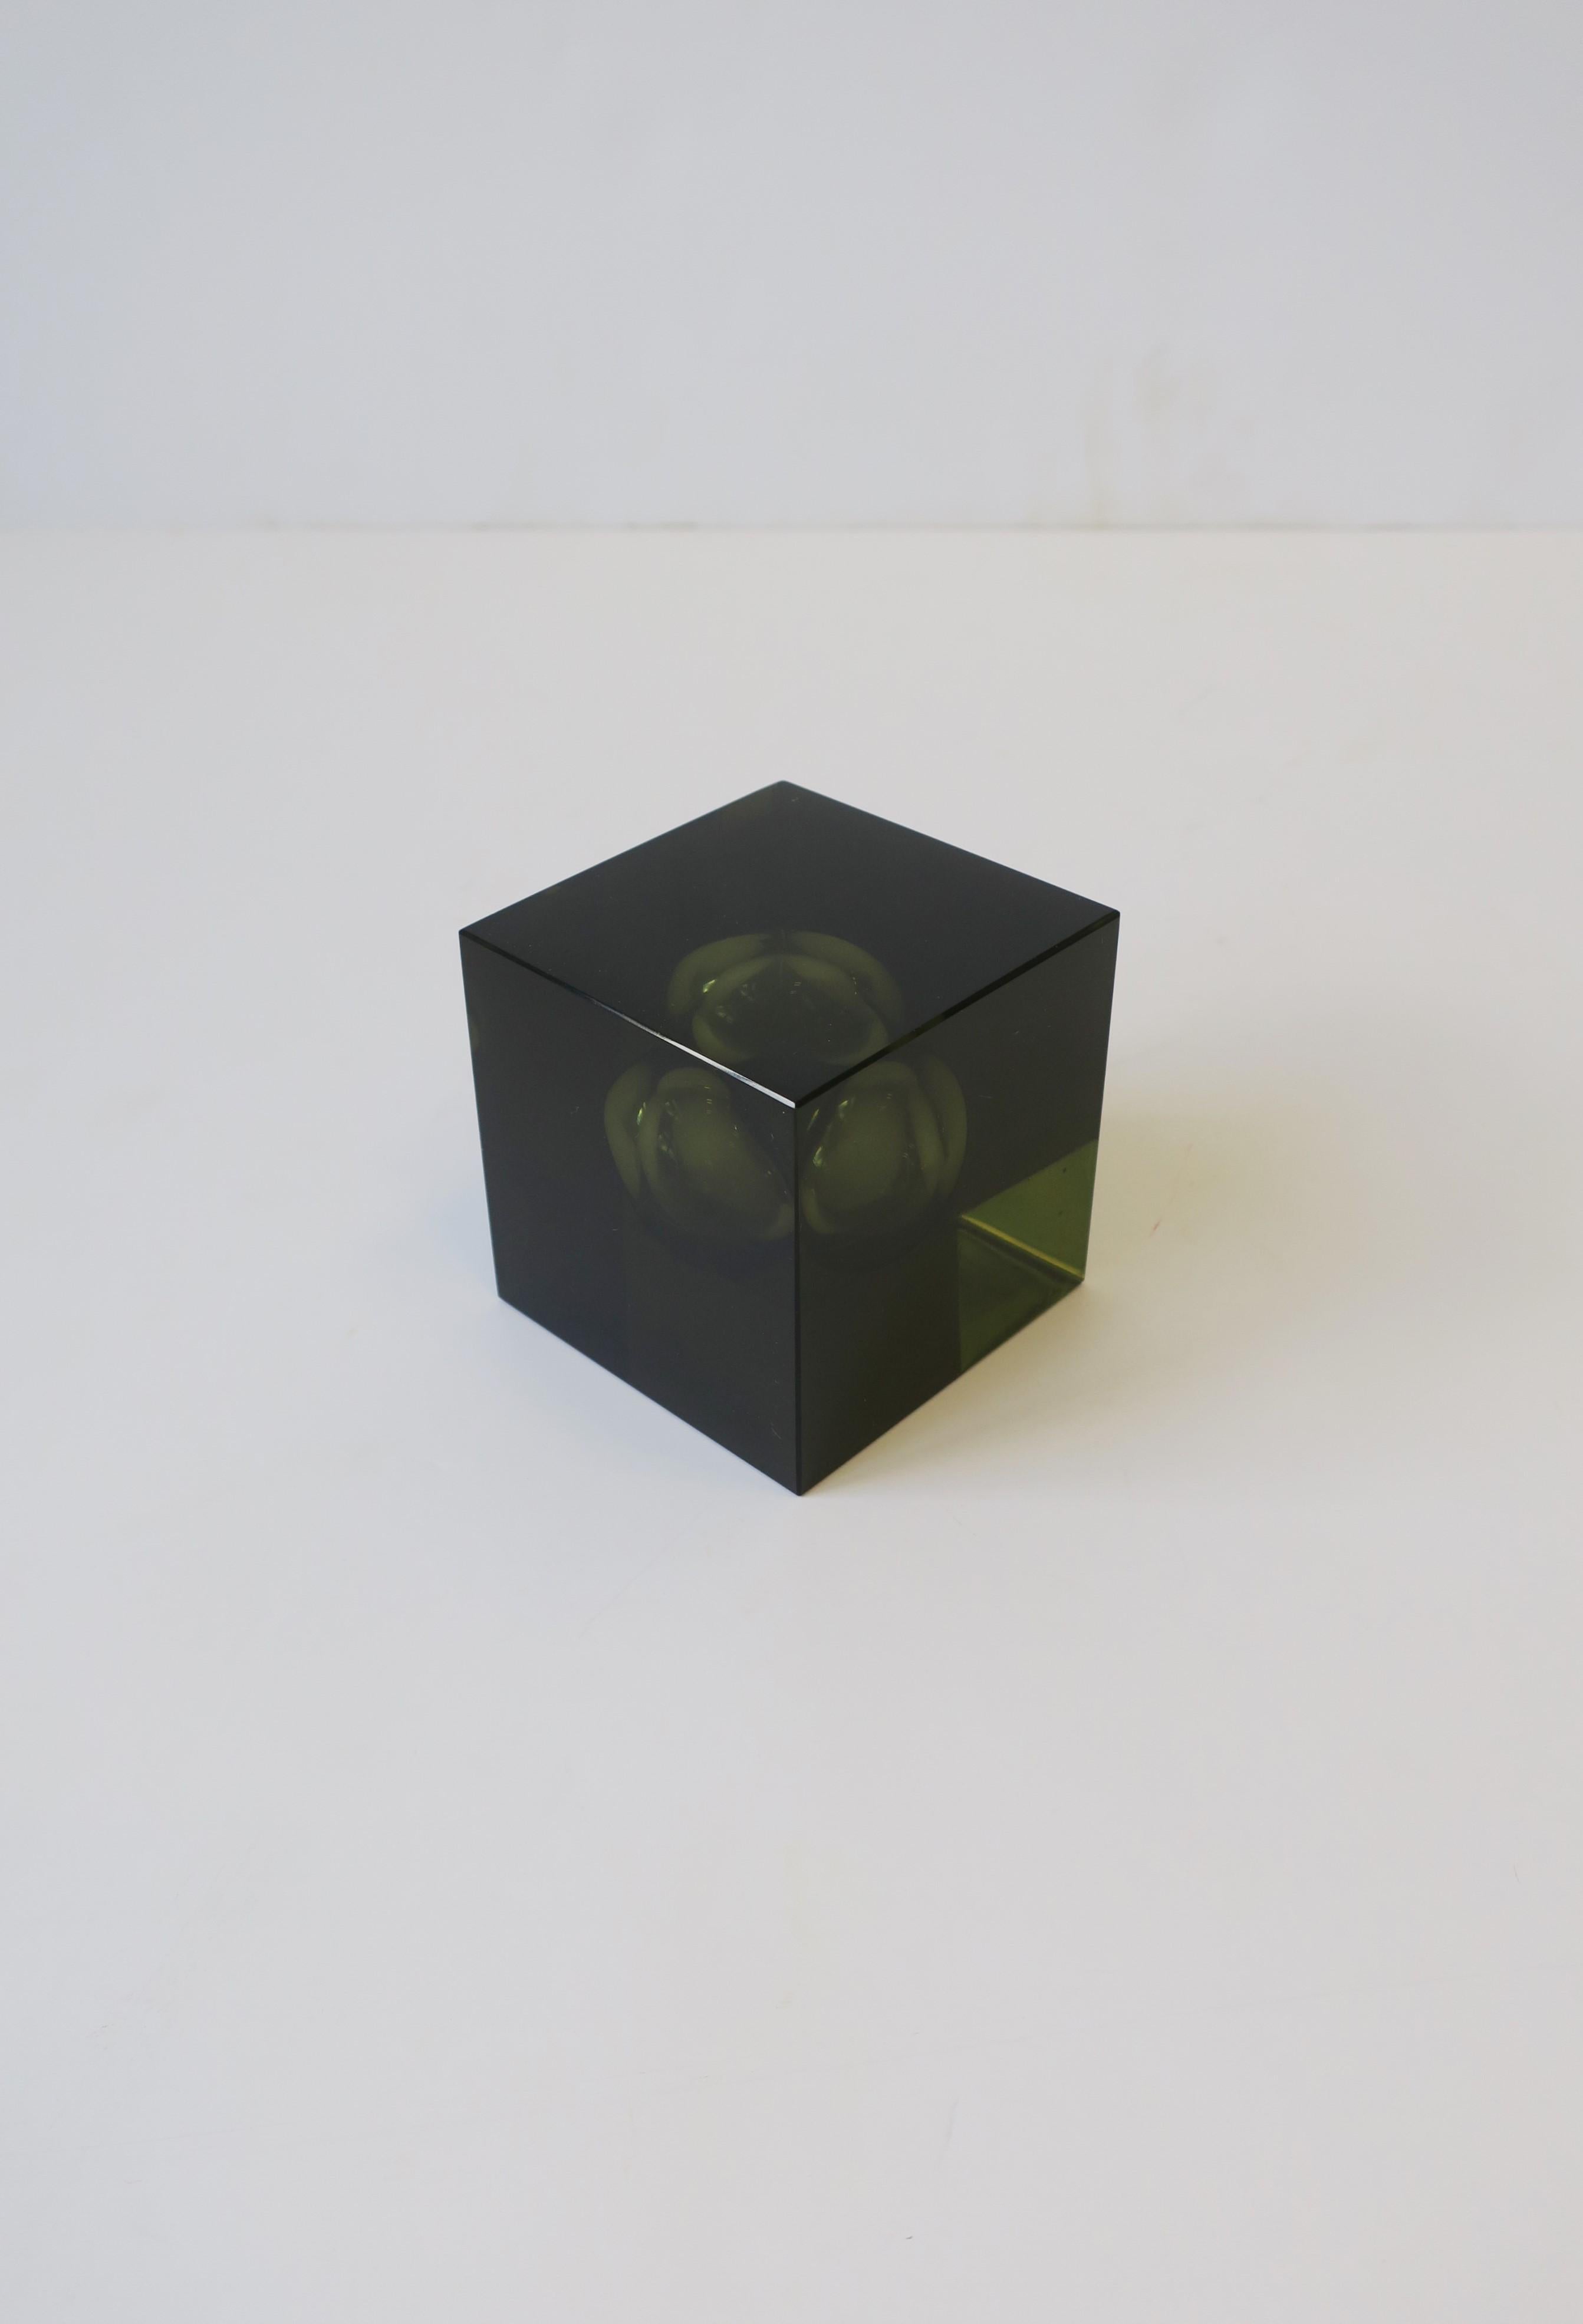 A beautiful and substantial hand-crafted smoked black crystal cube by luxury maker Kagami, Japan. Beautiful handmade crystal cube with internal crystal bubble in the modern style or post-modern design period. Great as a standalone decorative object